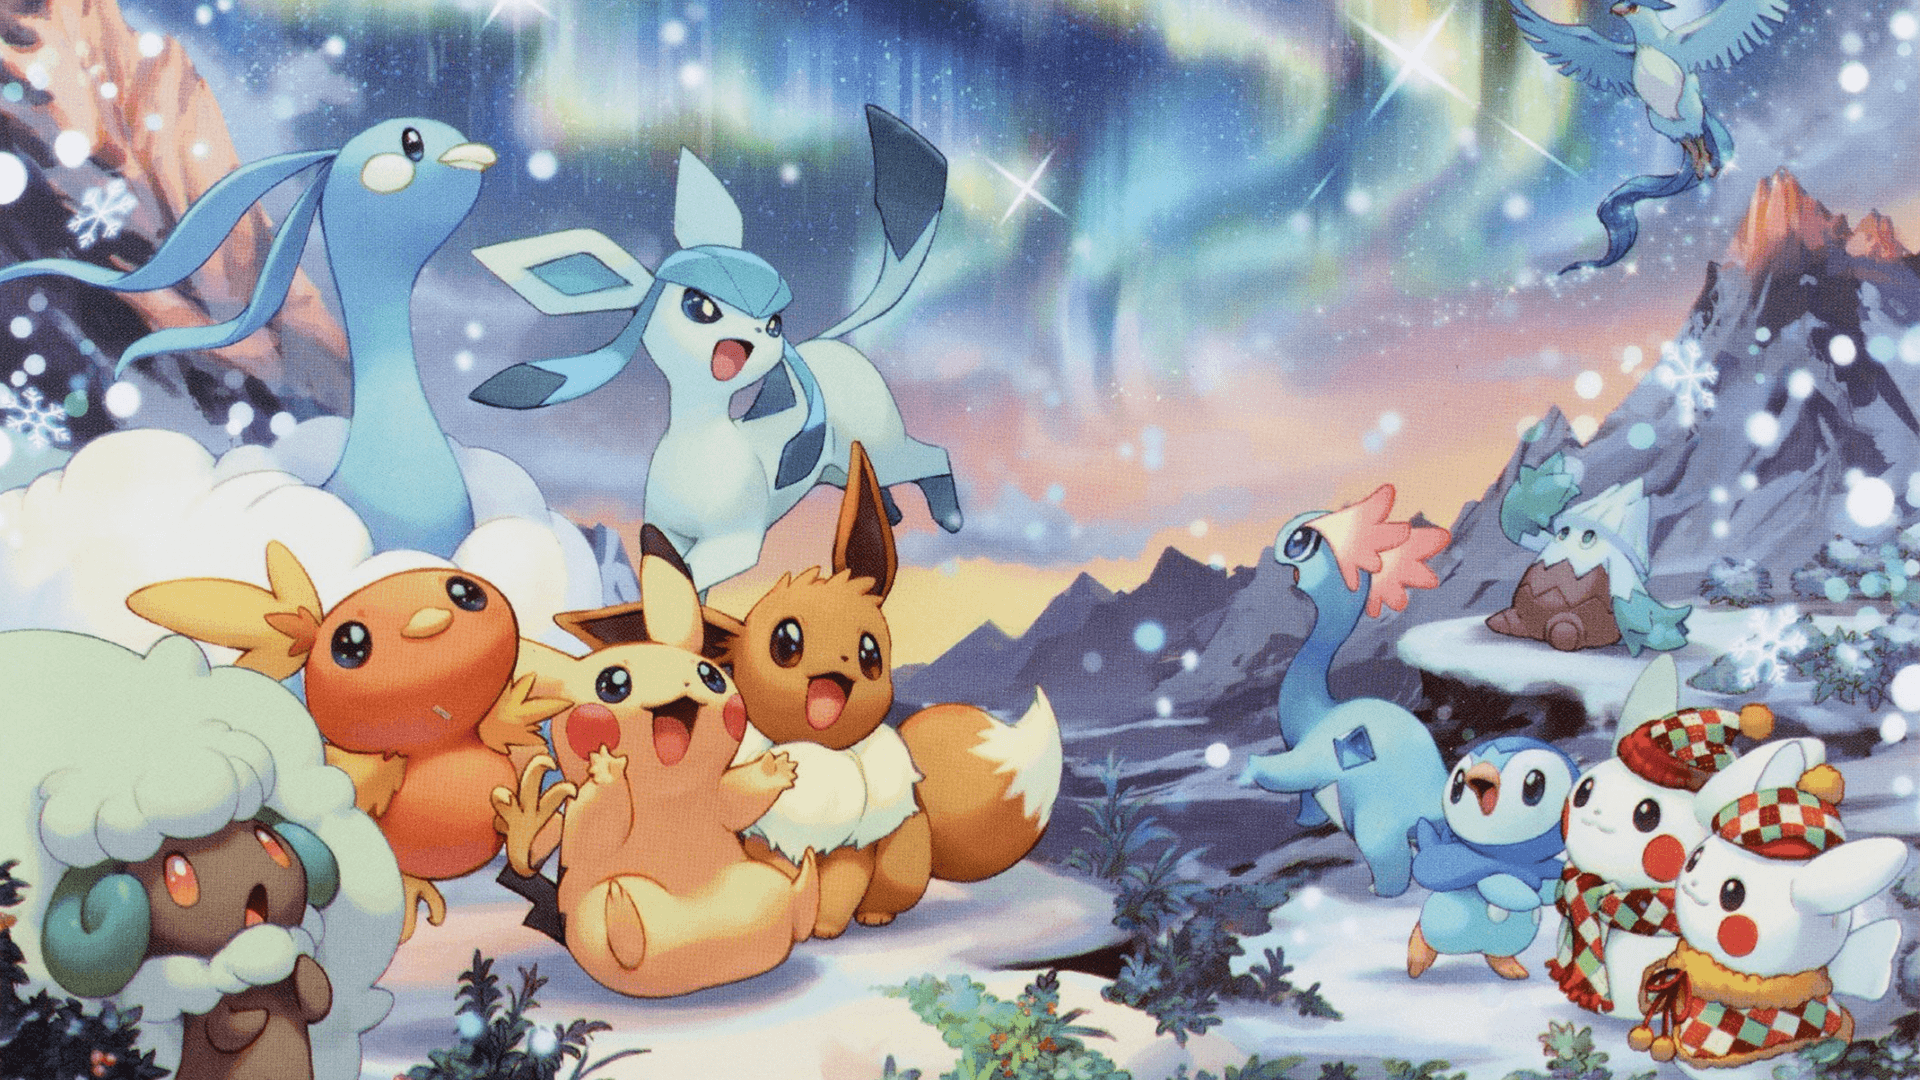 Pokemon: Let's Go Pikachu and Let's Go Eevee Wallpapers